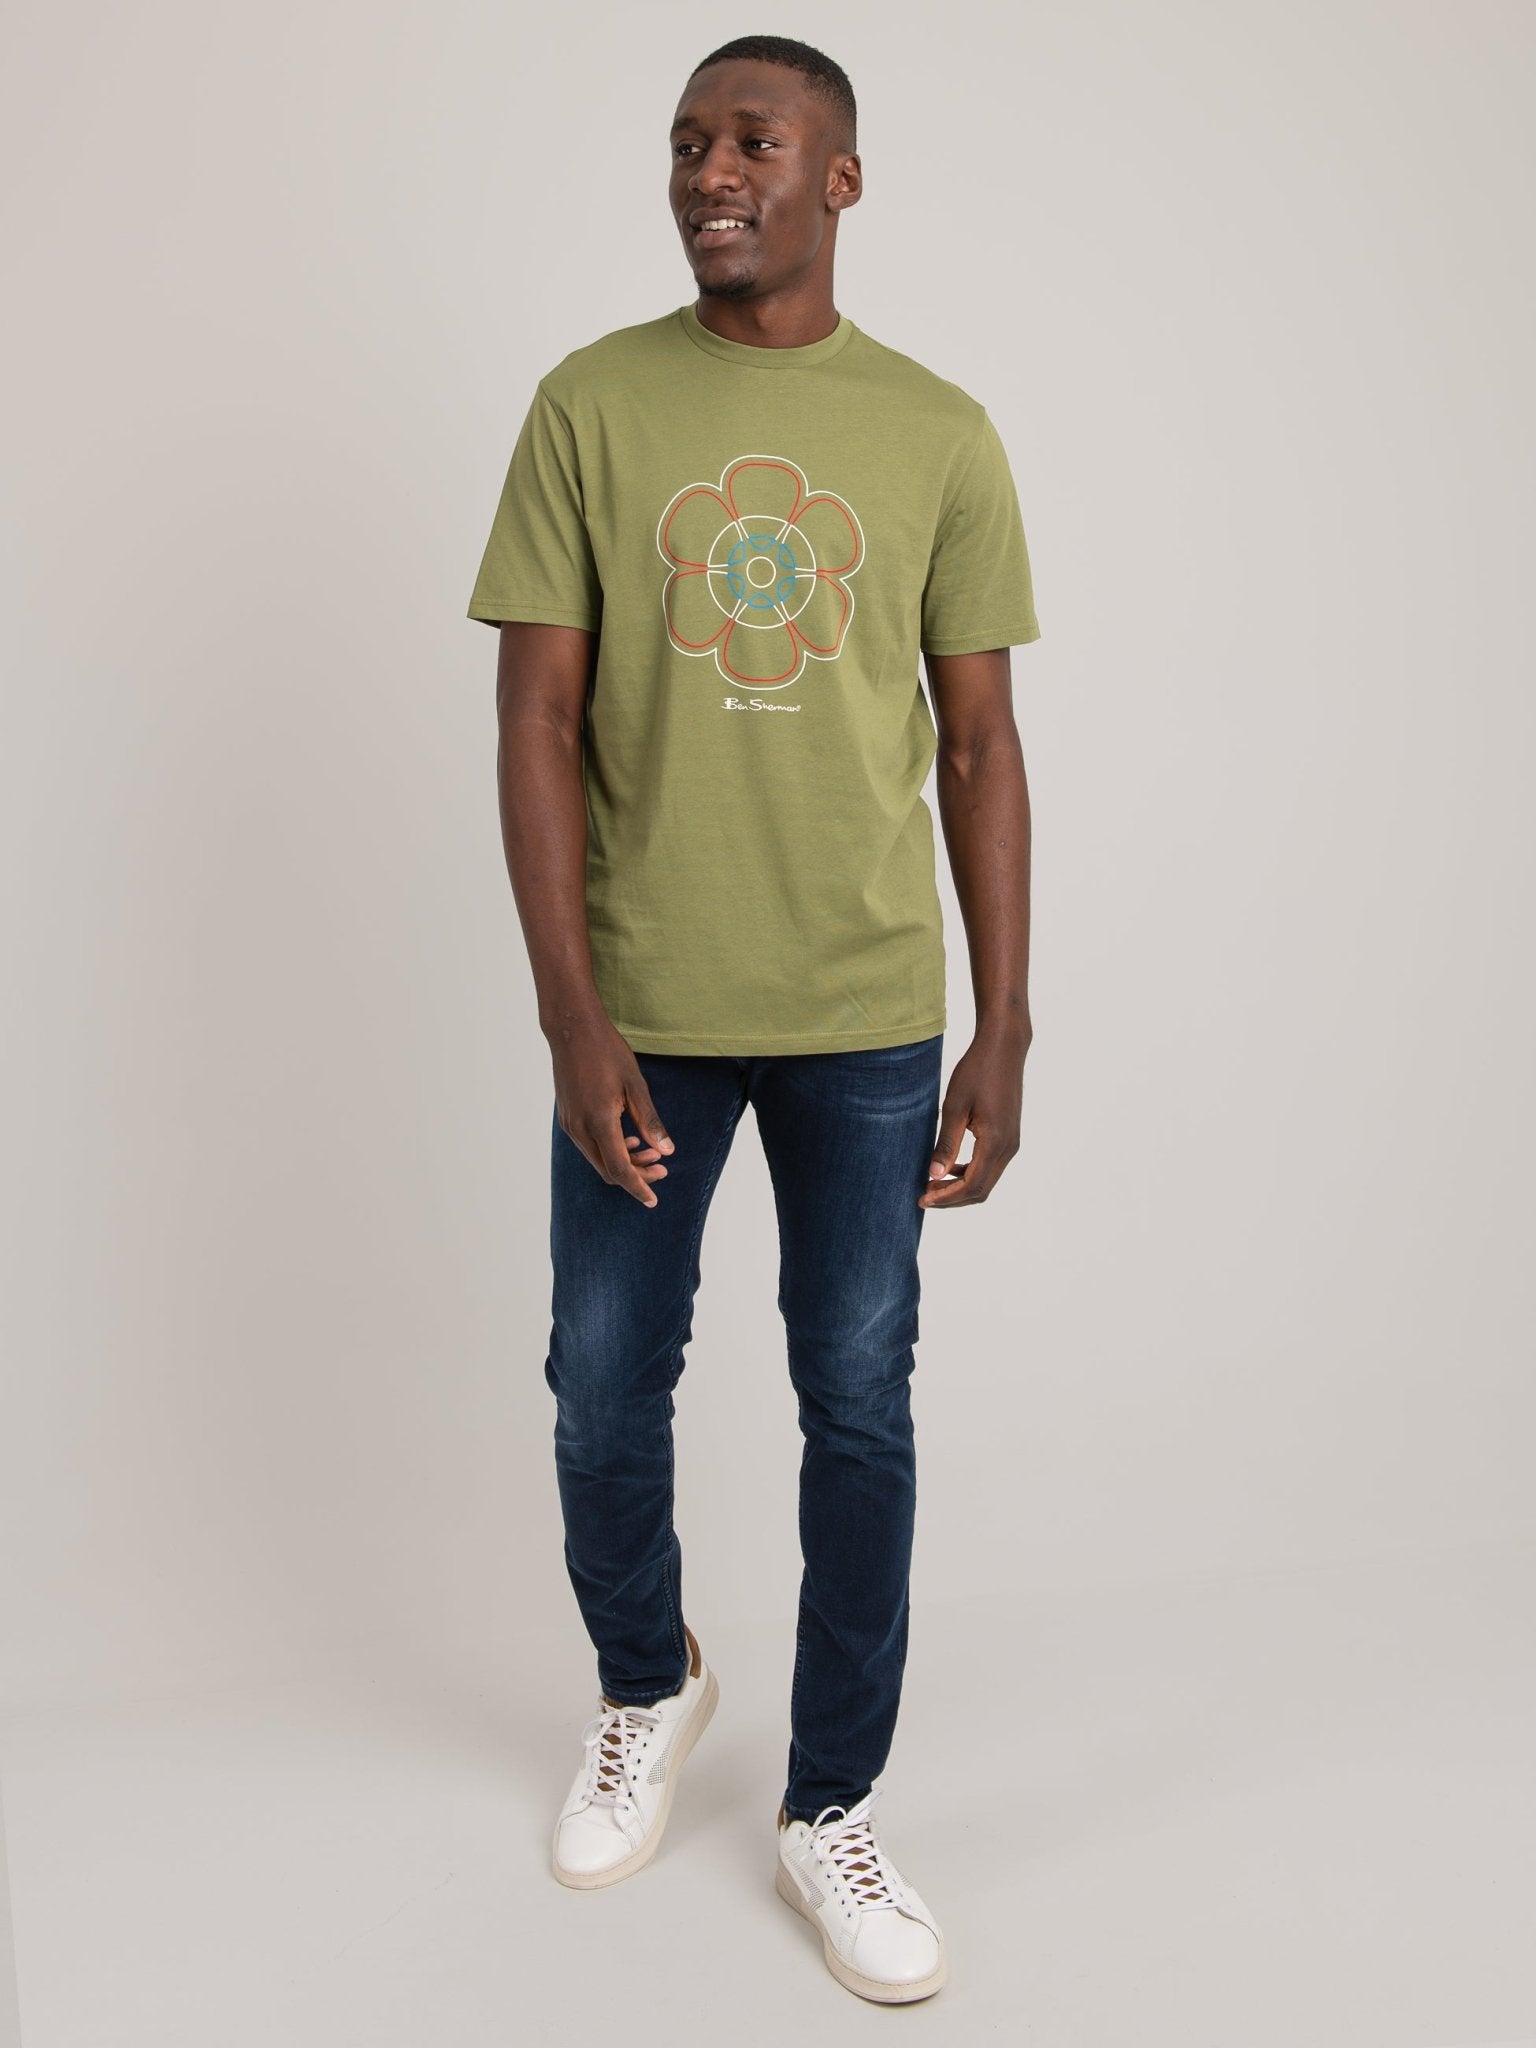 60th Anniversary Tee - Loden